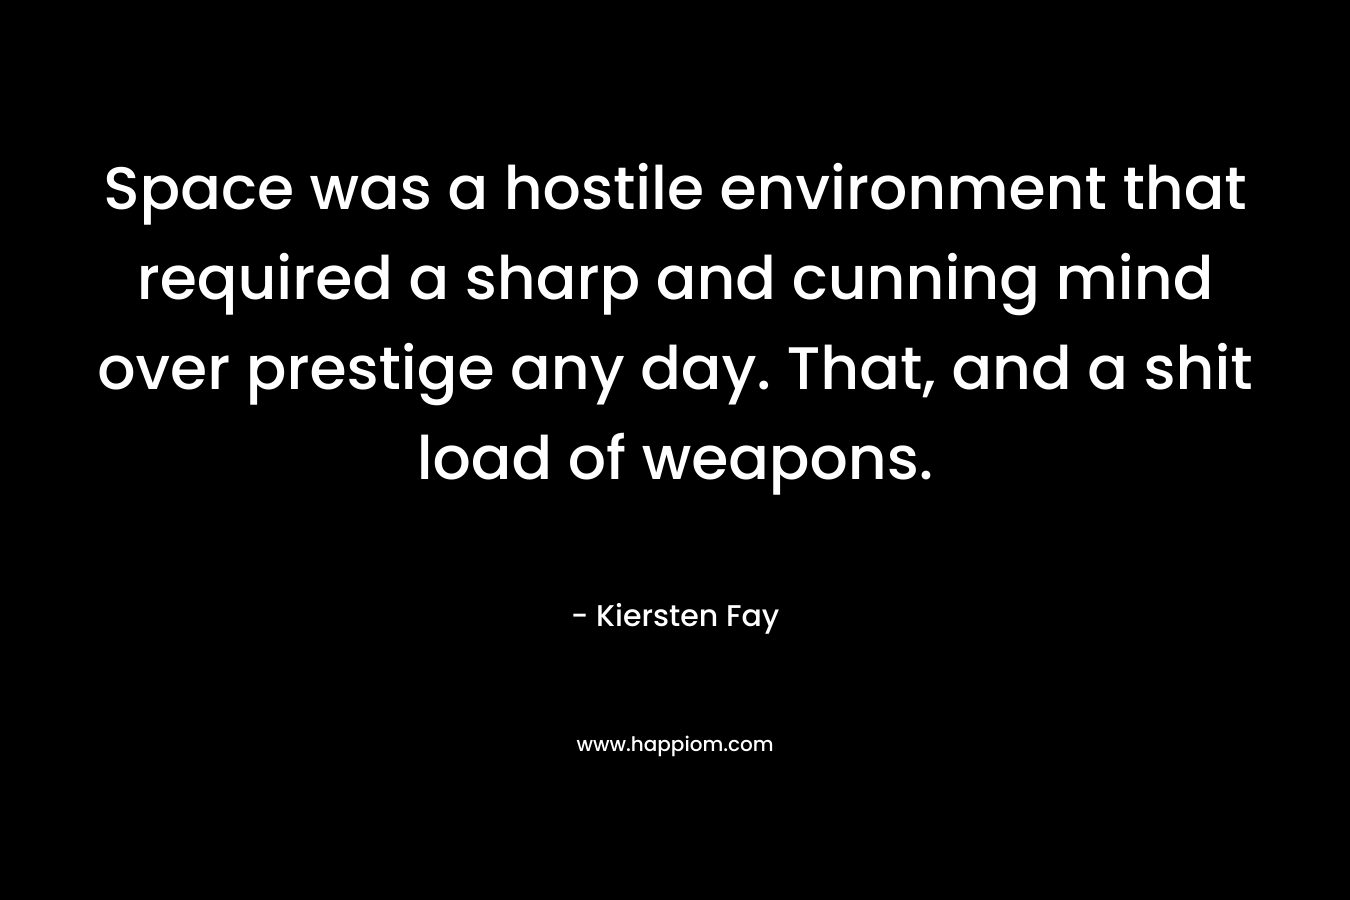 Space was a hostile environment that required a sharp and cunning mind over prestige any day. That, and a shit load of weapons. – Kiersten Fay